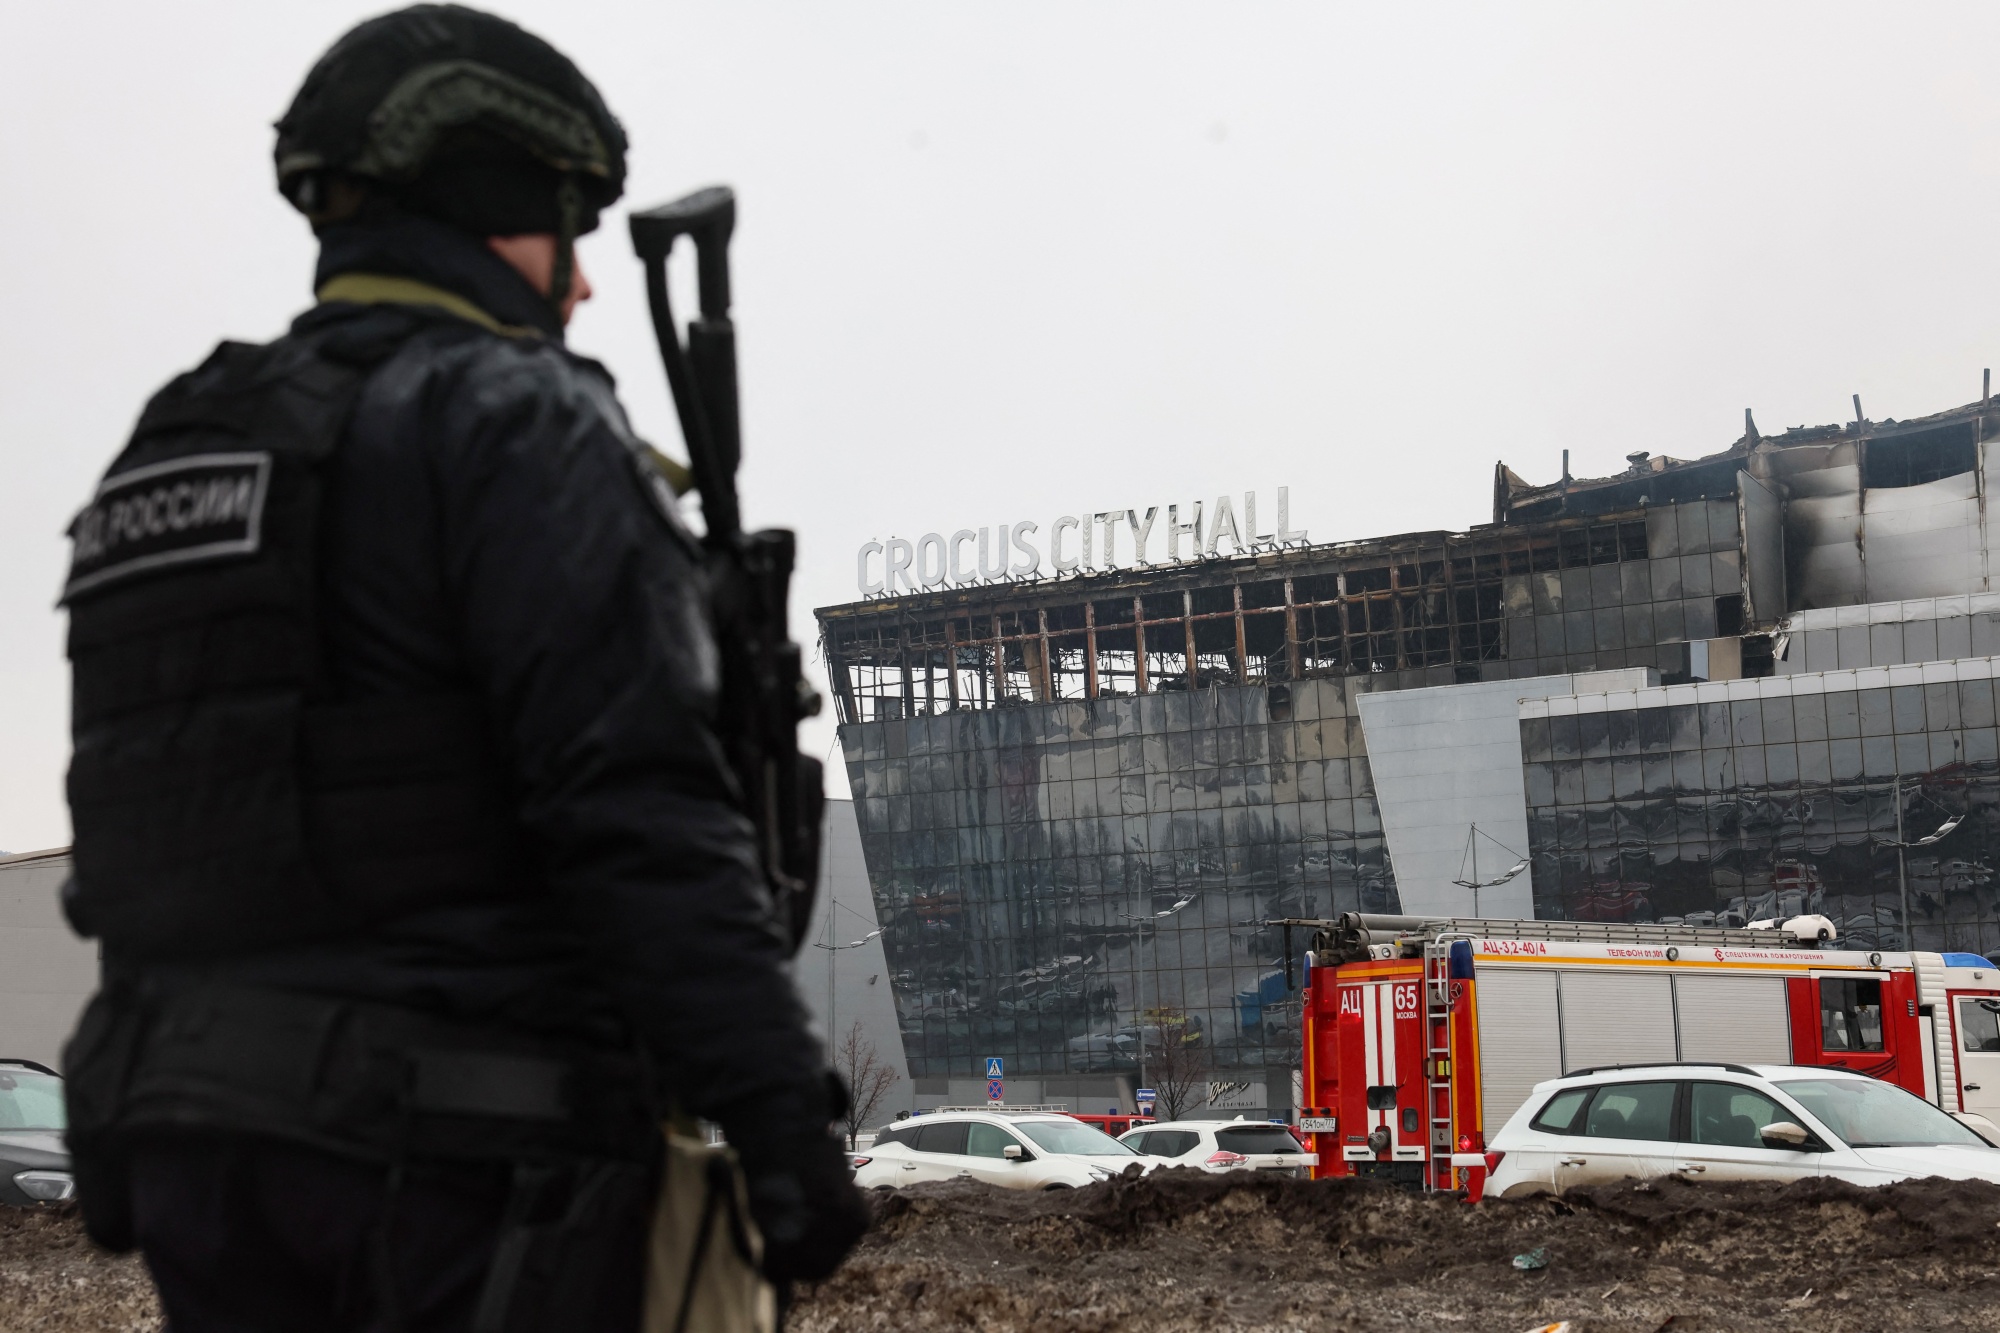 A law enforcement officer patrols the scene of the gun attack at the Crocus City Hall concert hall in Krasnogorsk, outside Moscow, on March 23.